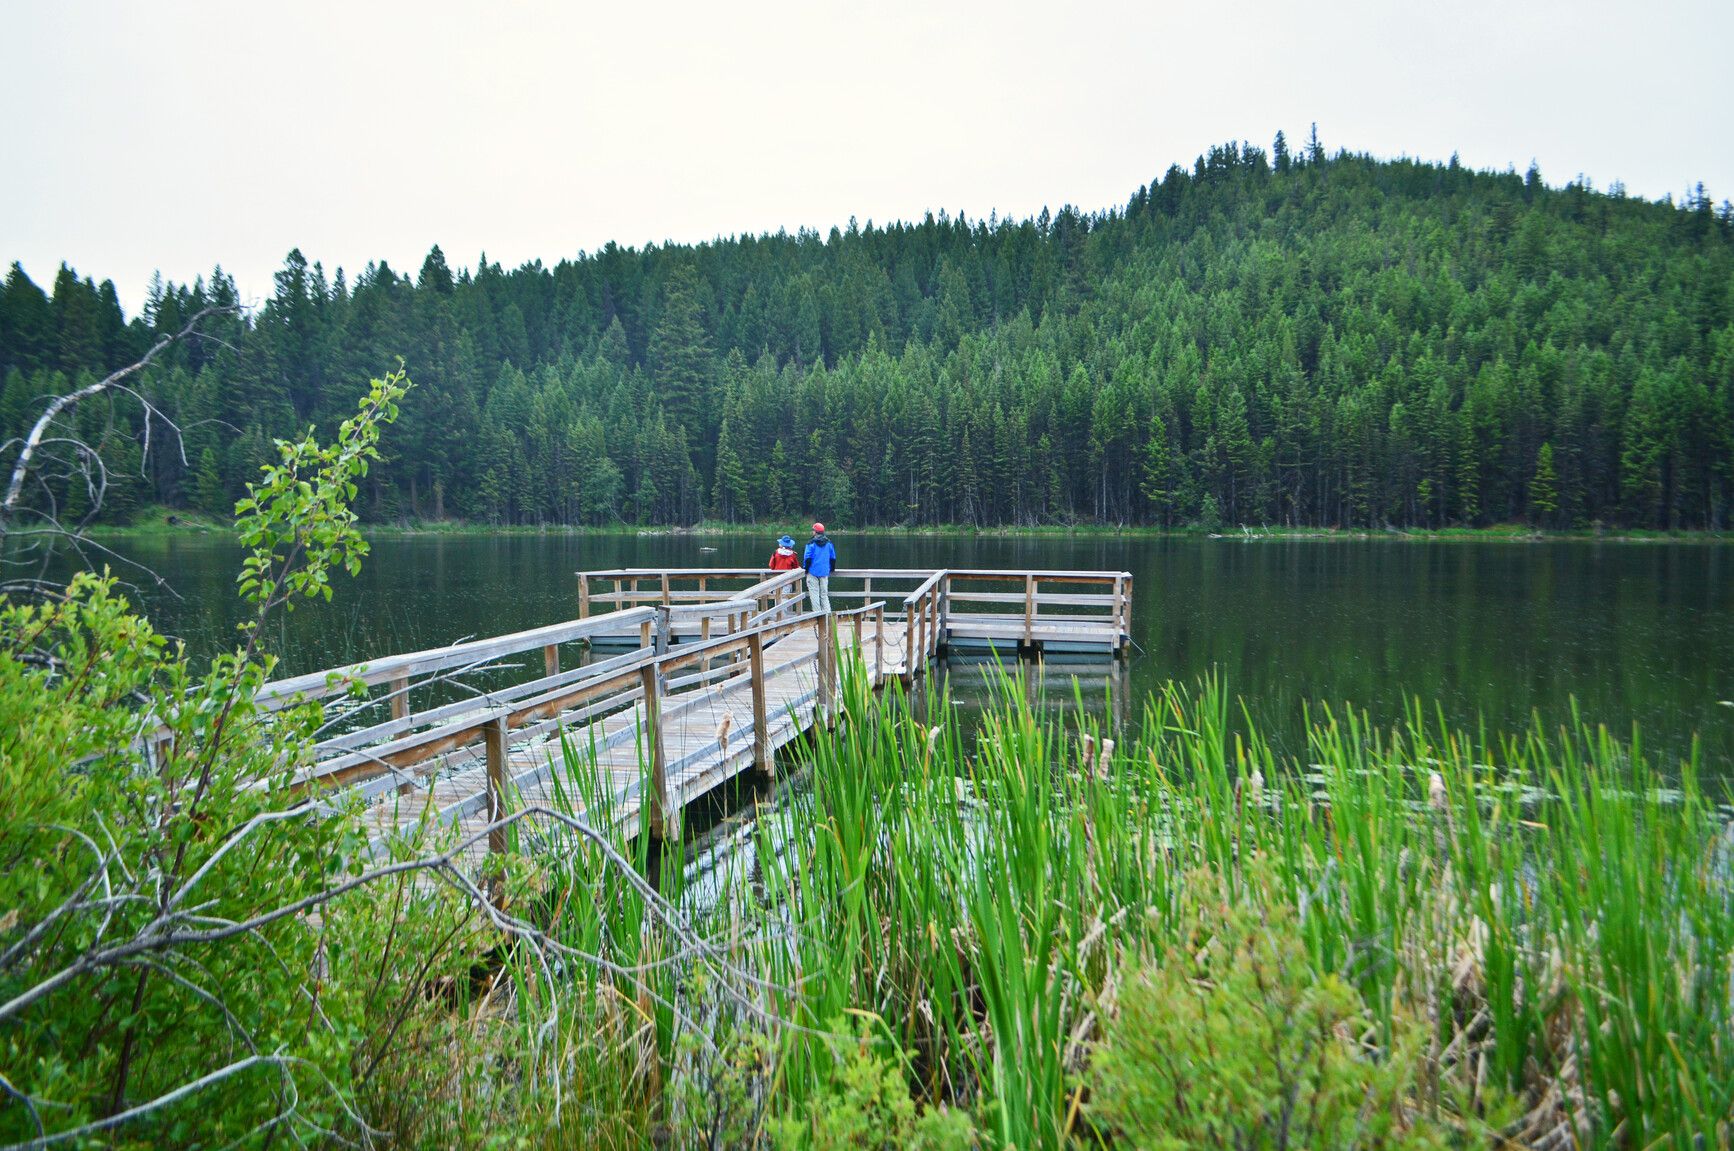 Park visitors take in the view of the lake and forest from the dock in Roche Lake Park.